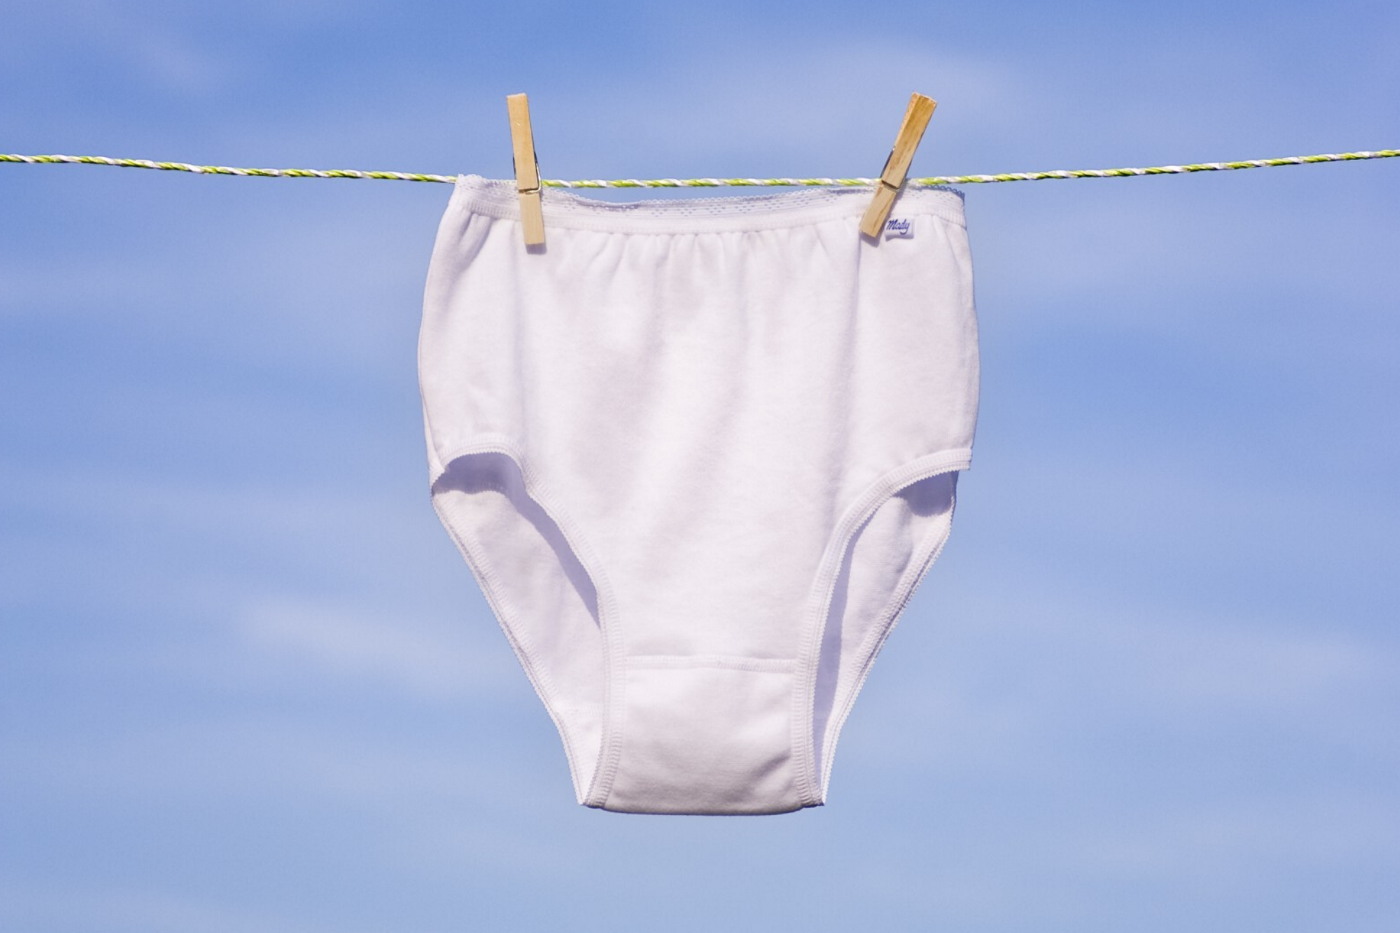 A European Fashion House Is Selling Granny Panties for $225 a pair